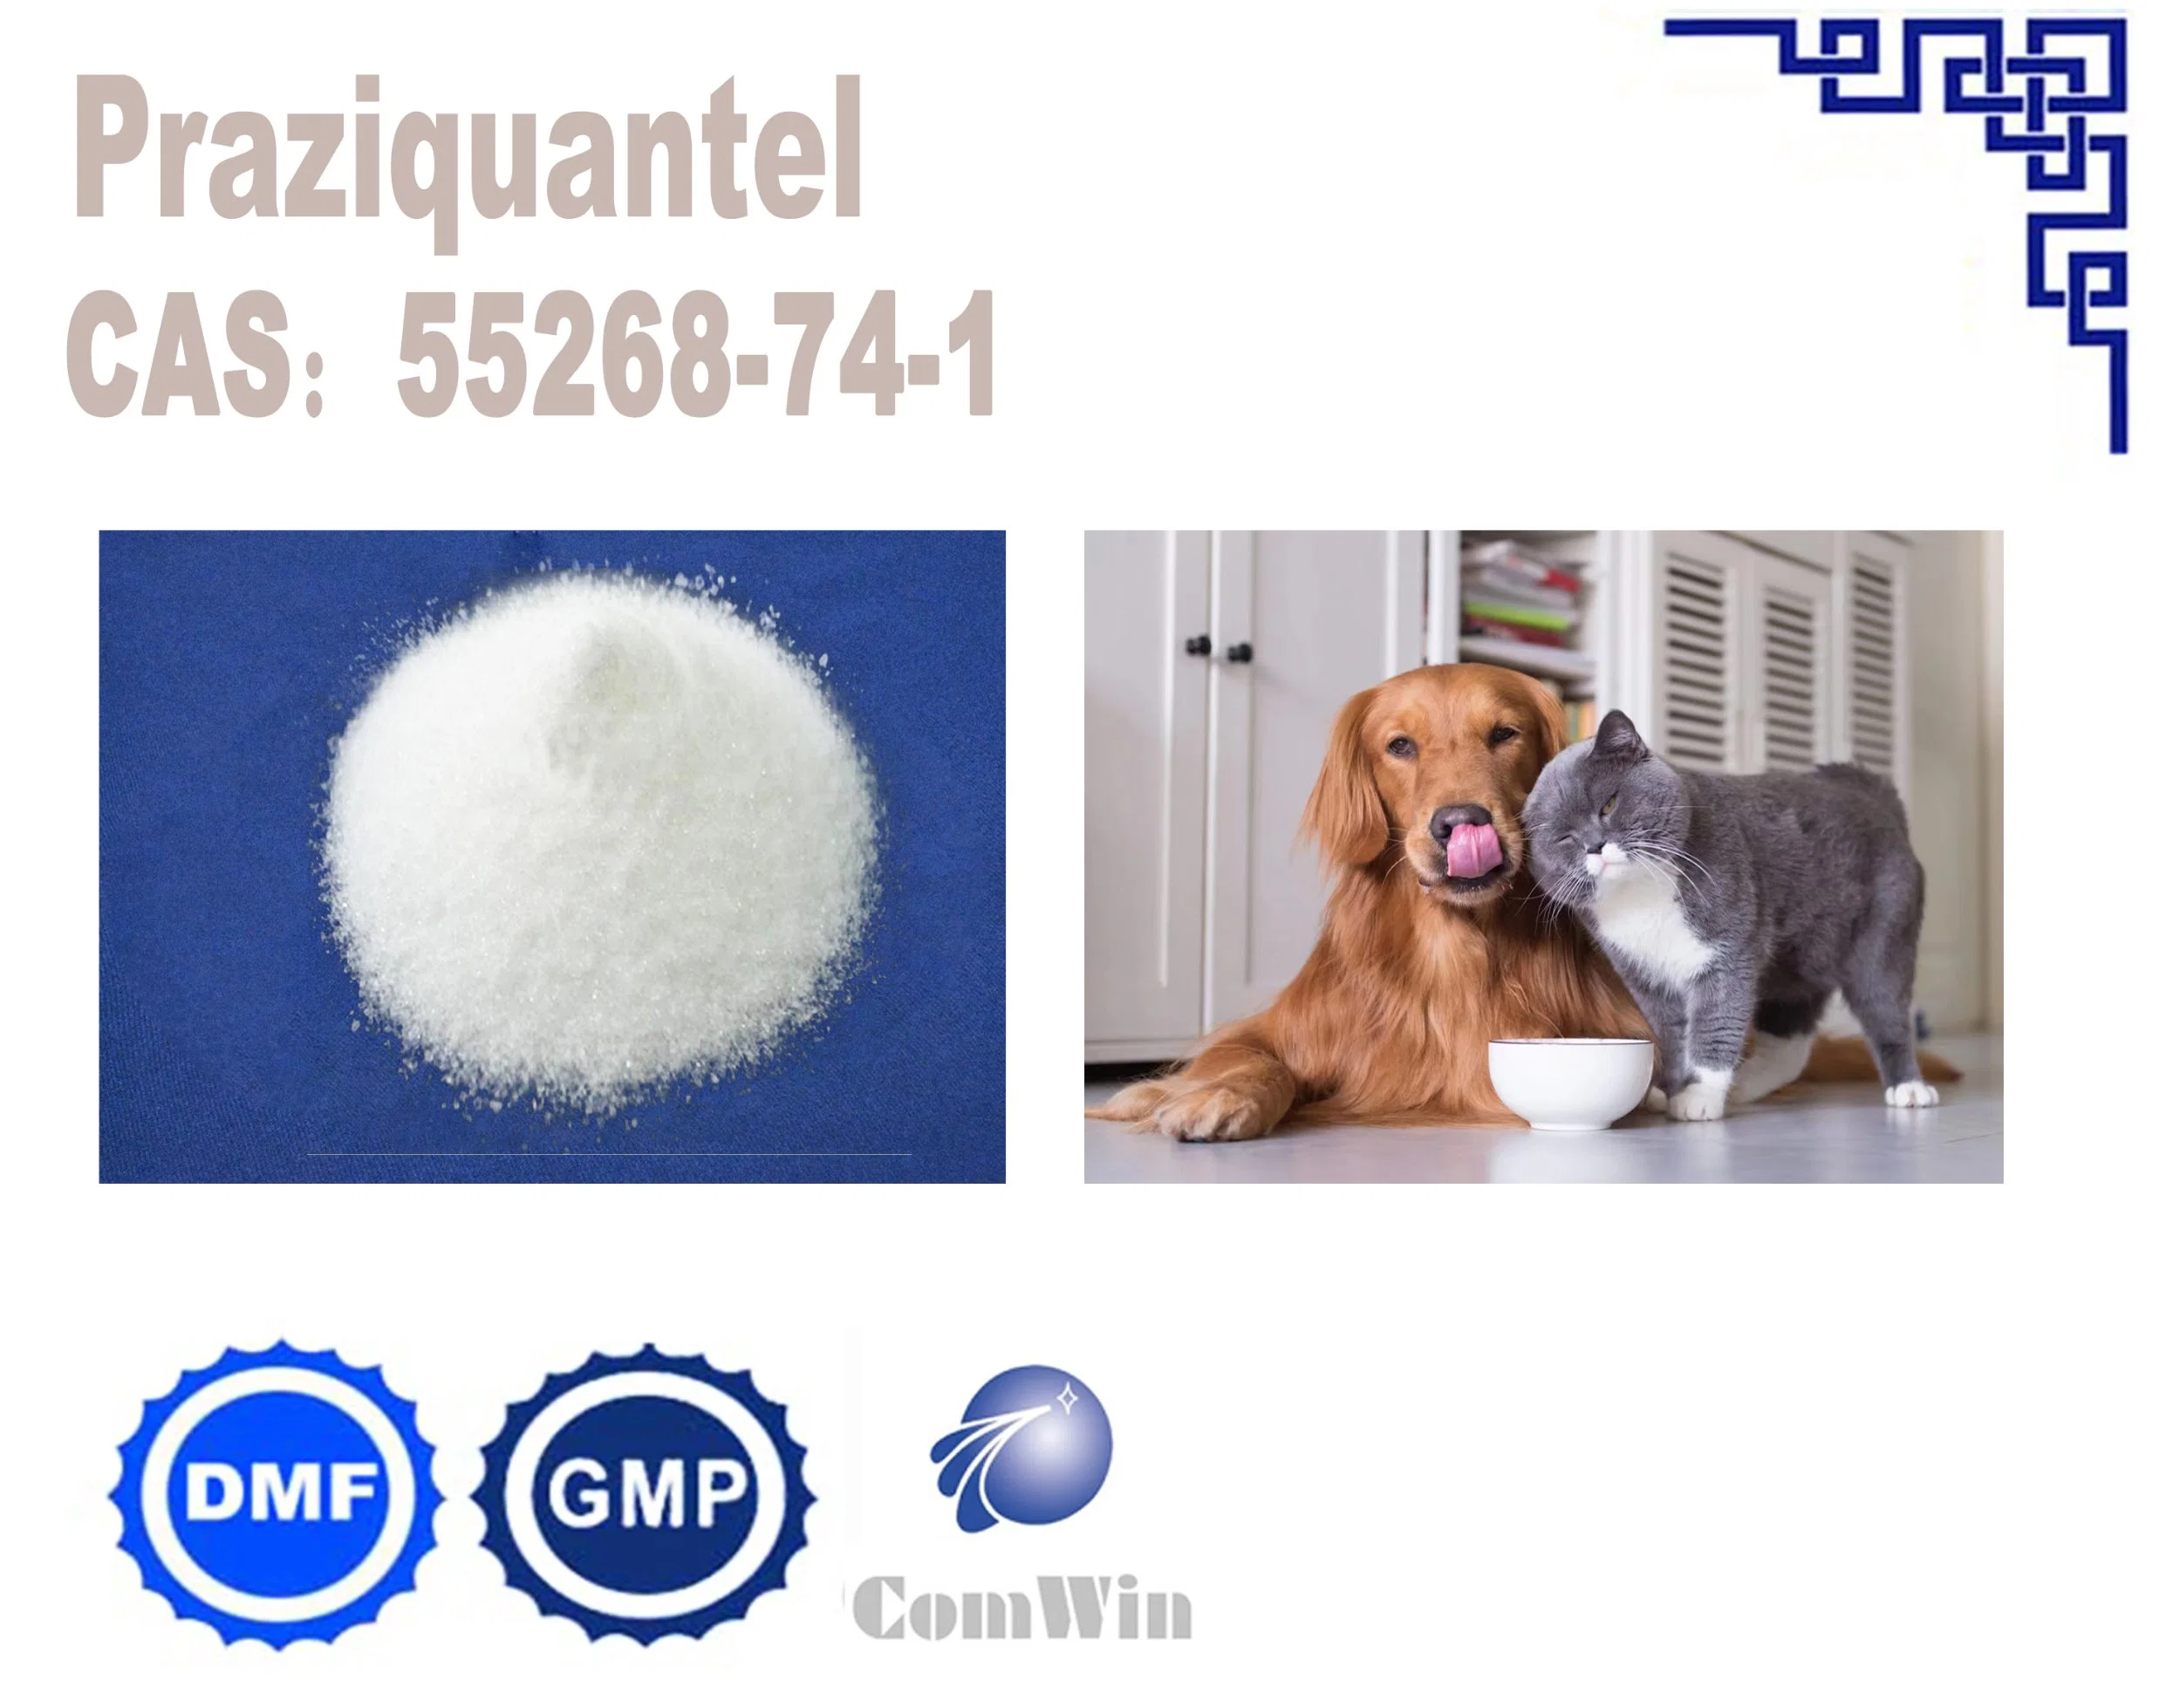 Effective Deworming with Praziquantel for Improve Animal Health